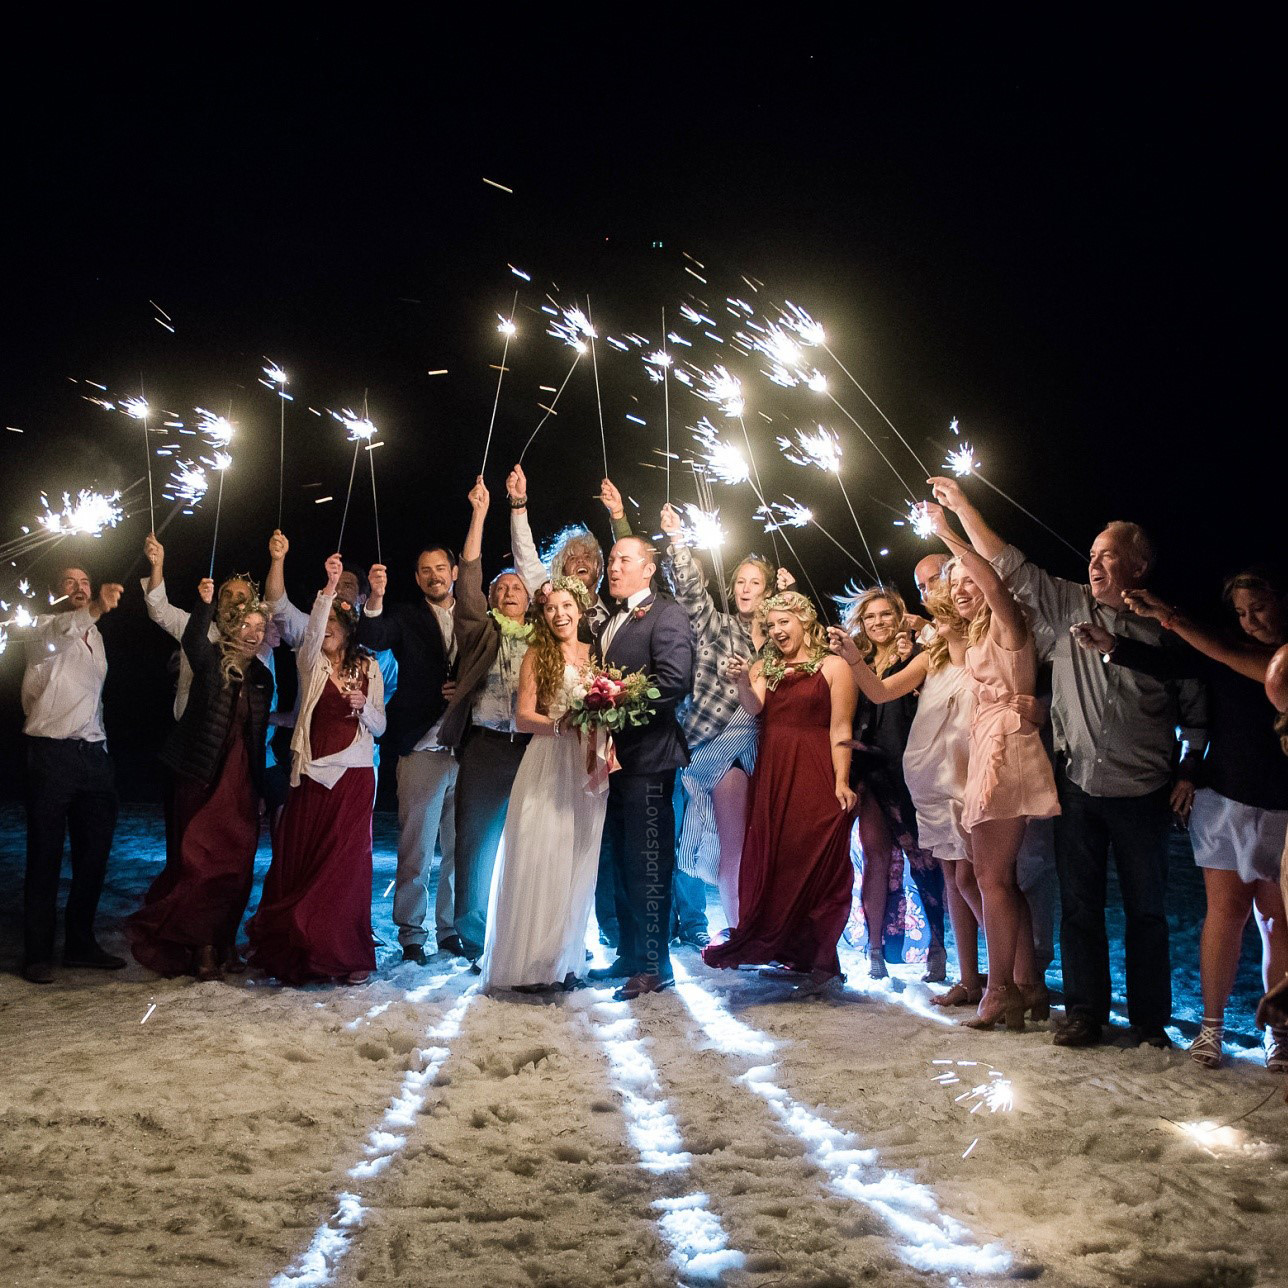 Best Place To Buy Wedding Sparklers
 When Do I Order Wedding Sparklers